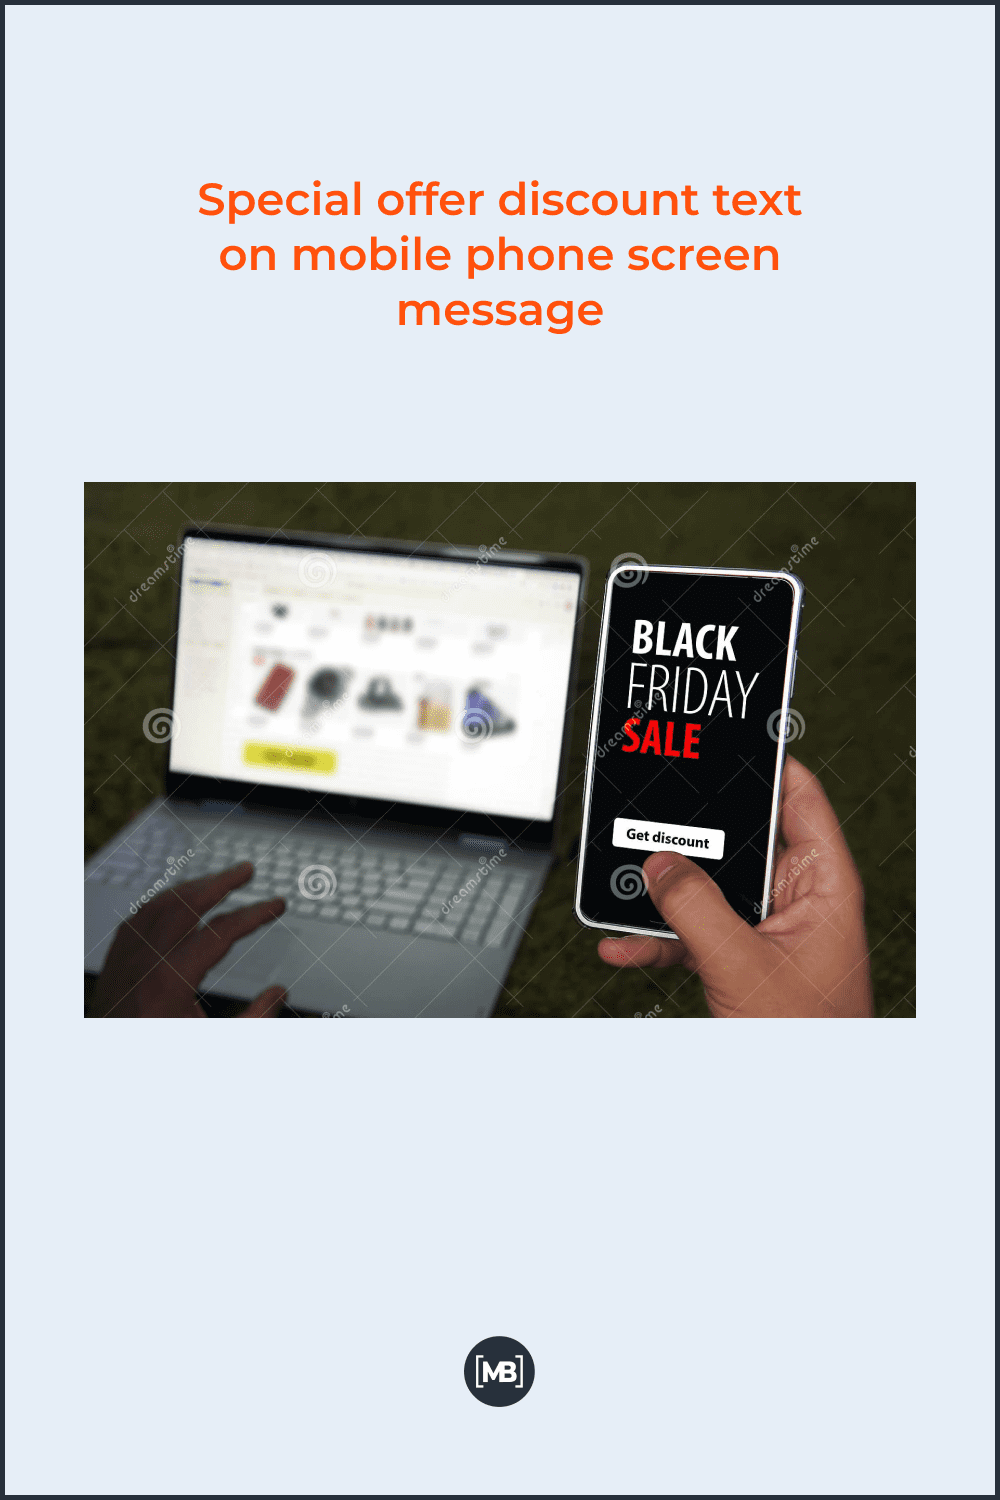 Special offer discount text on mobile phone screen message.